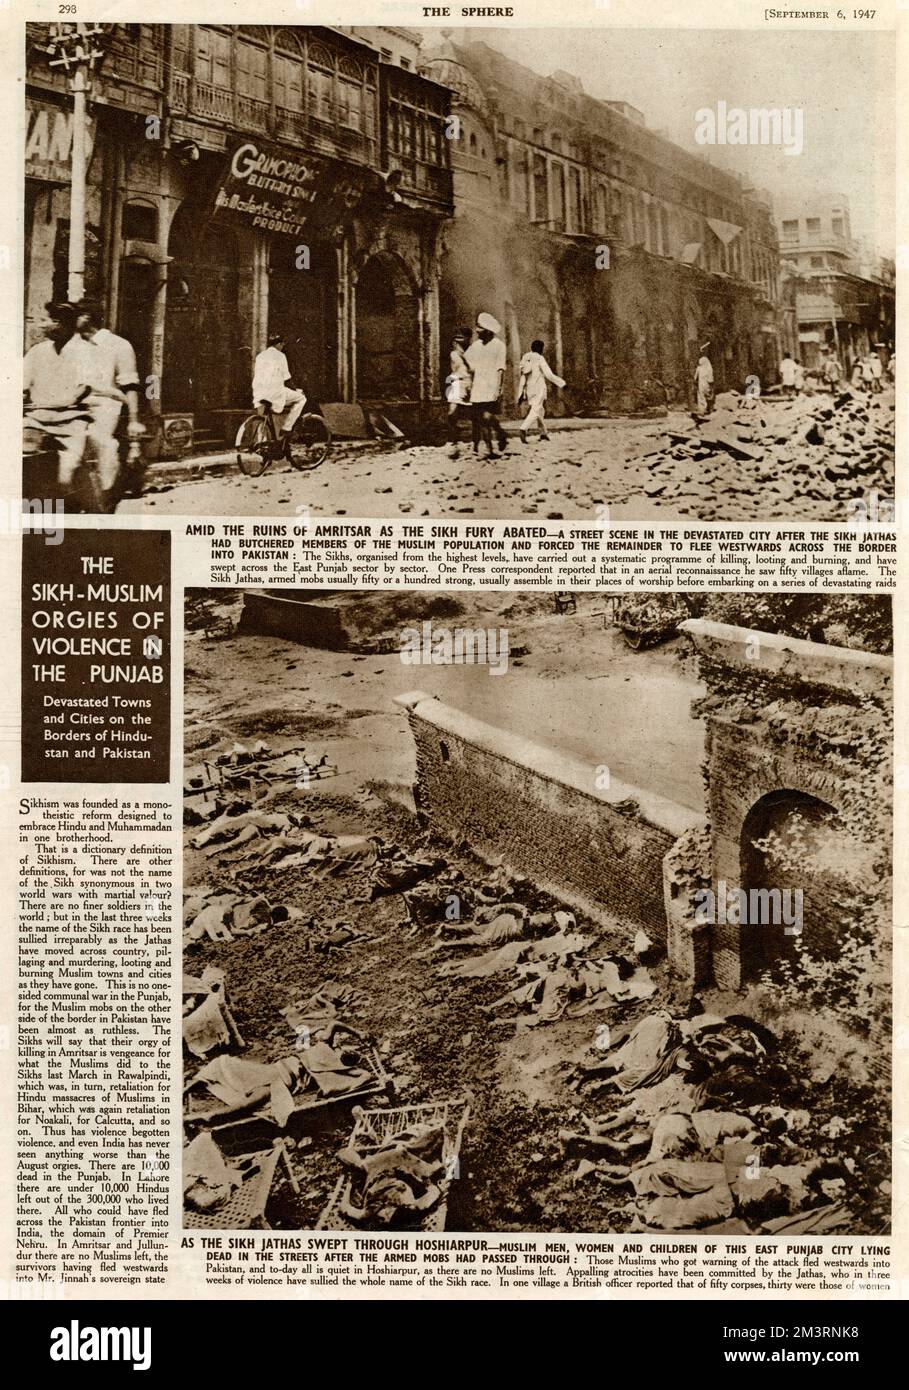 Page from The Sphere reporting on the devastating violence and murder following partition in India.  Pictures show the aftermath after Sikh jathas had looted, murdered and burned Muslim towns and cities.  Top photograph shows the ruins of Amritsar and bottom image shows the bodies of murdered Muslim men, women and children in the East Punjab city of Hoshiarpur.       Date: 1947 Stock Photo